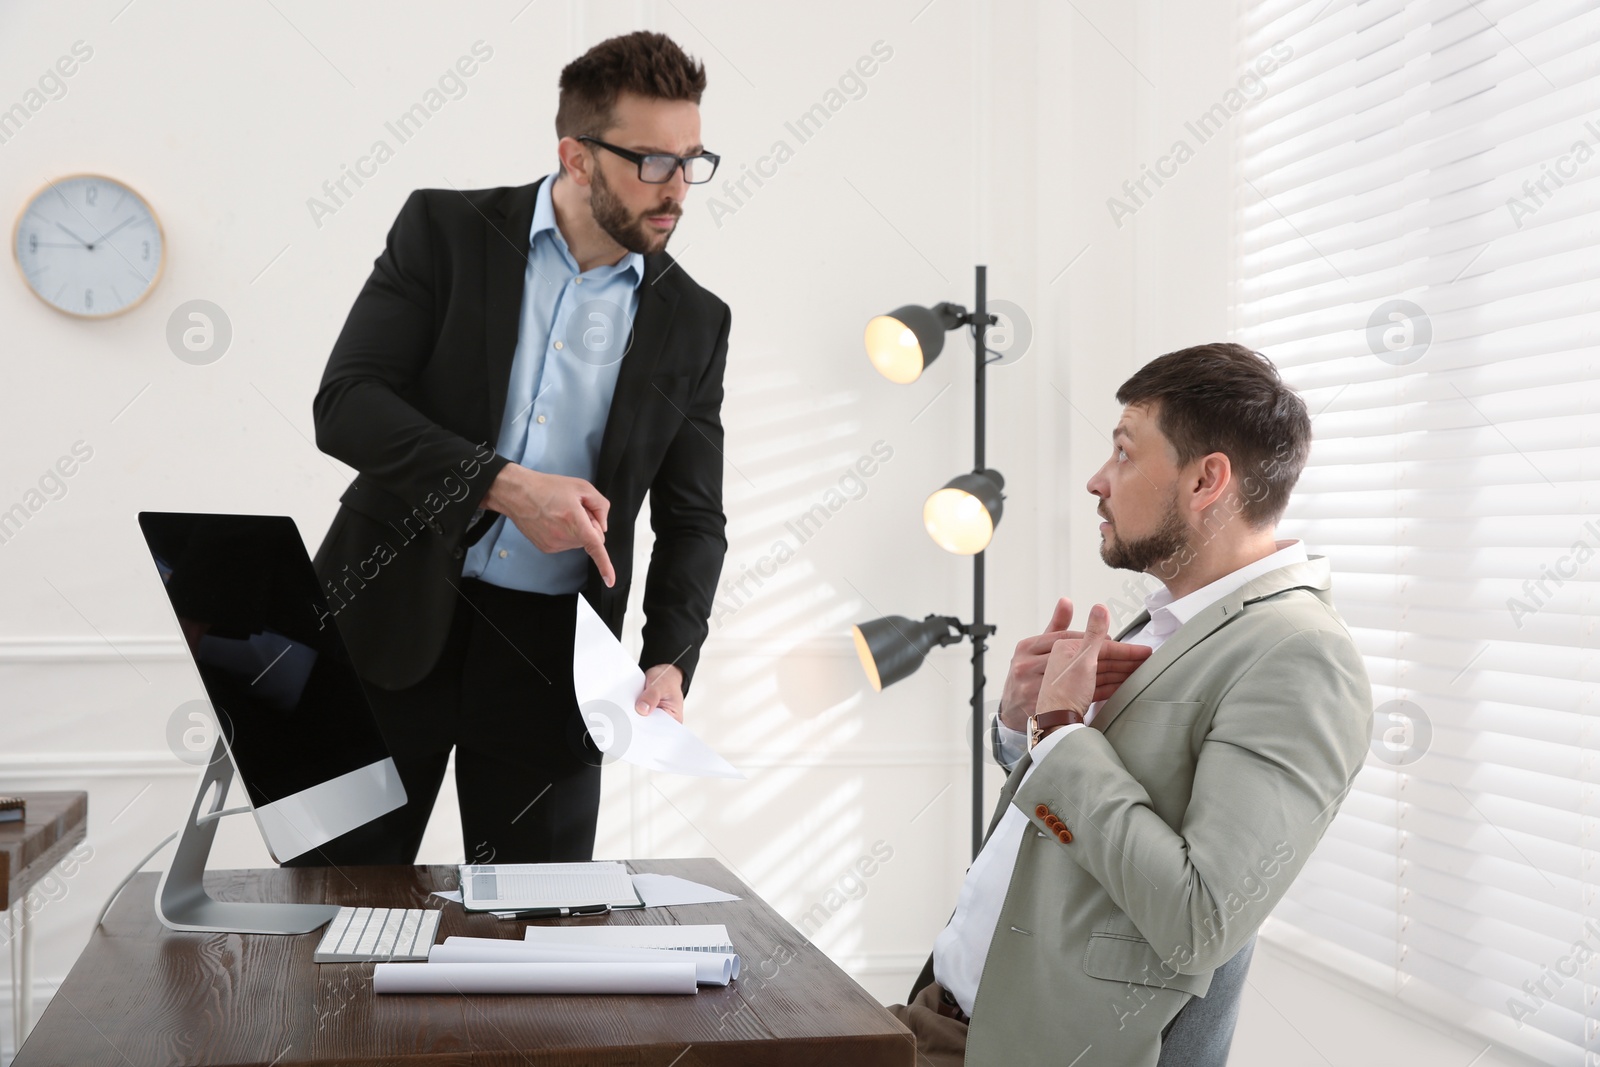 Photo of Boss scolding employee in office. Toxic work environment